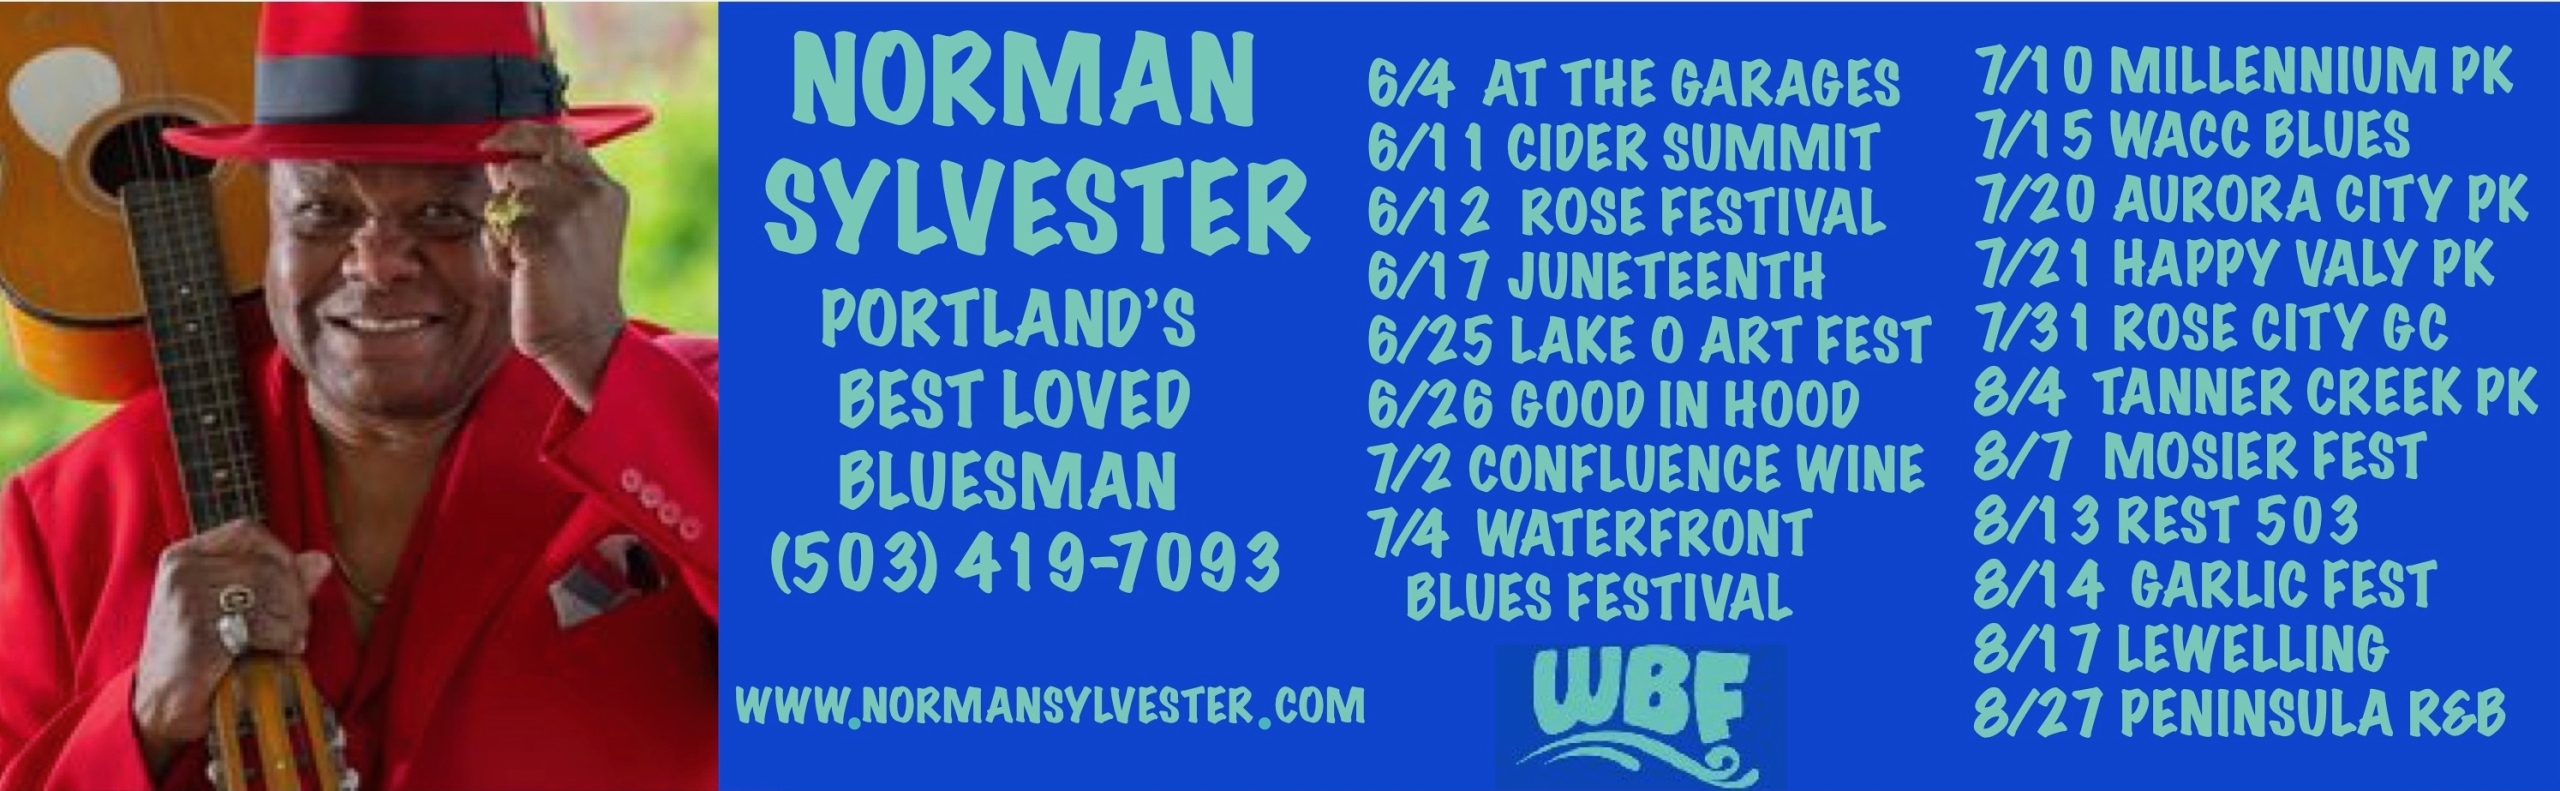 Norman Sylvester Portland's  best loved bluesman (503) 419-7093 www.normansylvester.com 6/4   At The Garages 6/11   Cider Summit 6/12.  Rose Festival 6/17  Juneteenth 6/25  Lake Oswego Festival of the Arts 6/26   Good In The Hood 7/2    Confluence Winery 7/4    Waterfront Blues Festival 7/10  Millennium Park 7/15  WACC Blues 7/20  Aurora City Park 7/21  Happy Valley Park 7/31  Rose City Golf Course 8/4   Tanner Creek Park 8/7    Mosier Fest 8/13  Restaurant 503 8/14  Garlic Festival 8/17   Lewelling  8/27   Peninsula R&B Festival       